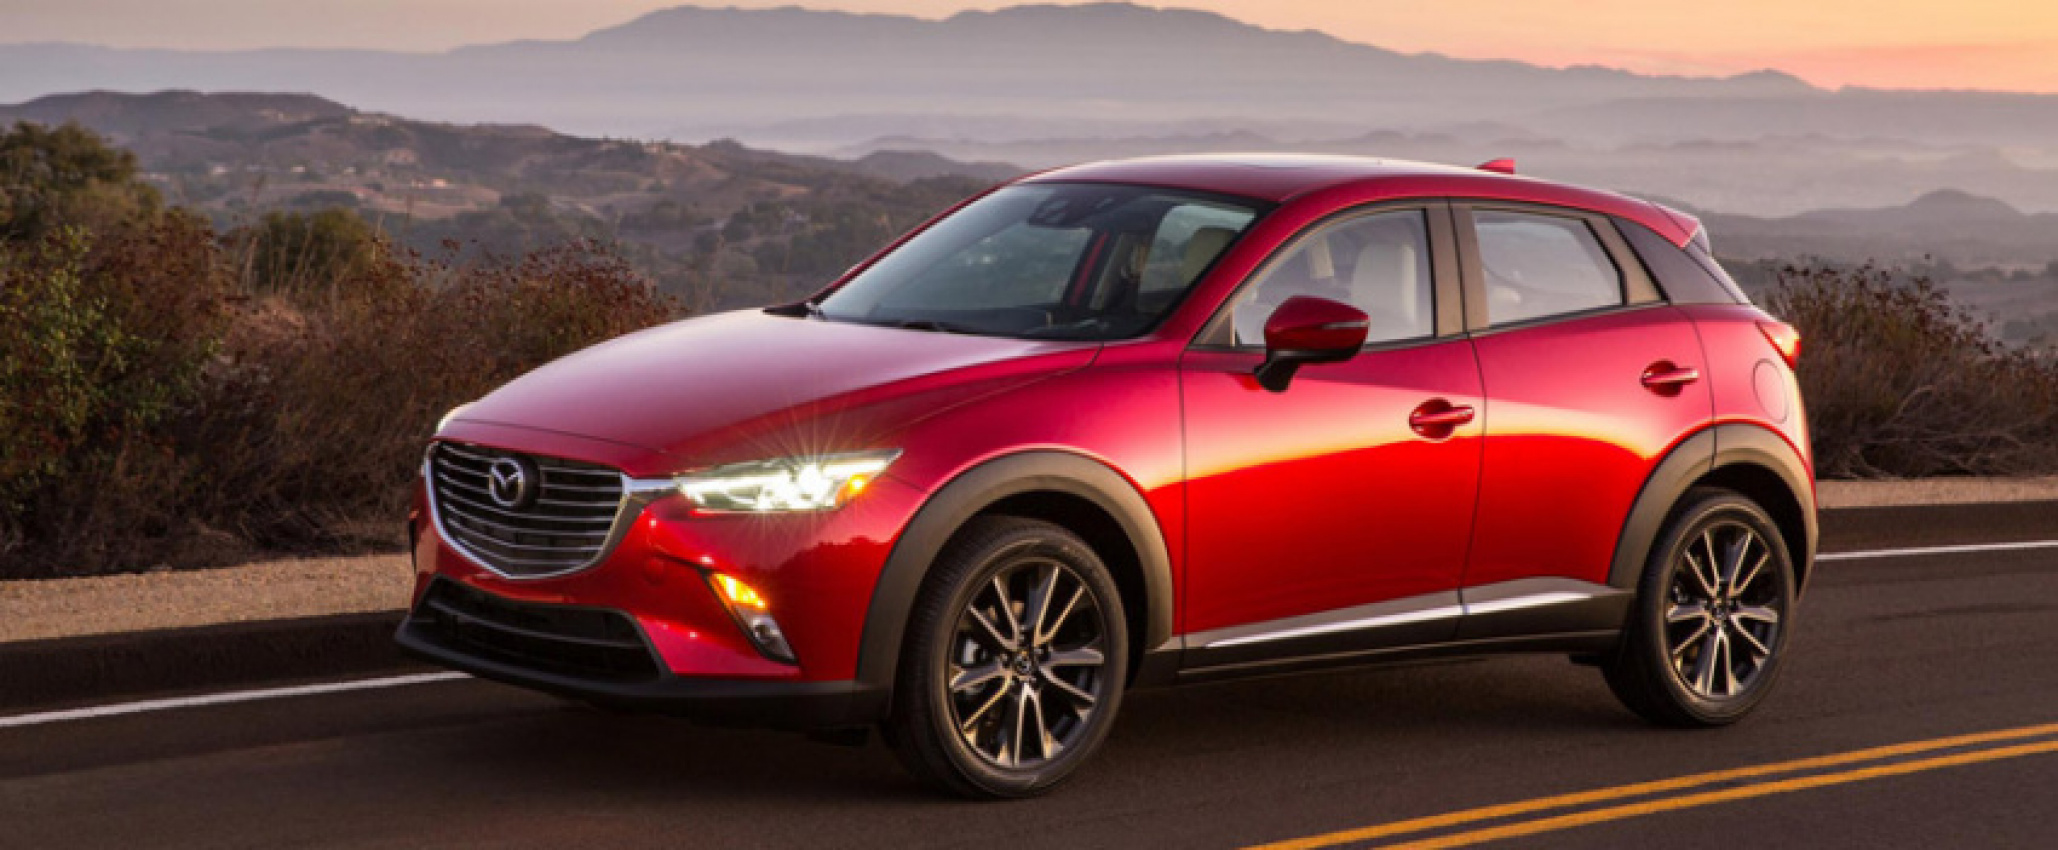 autos, cars, mazda, mazda cx-3, 2017 mazda cx-3 heads our way! what to expect?